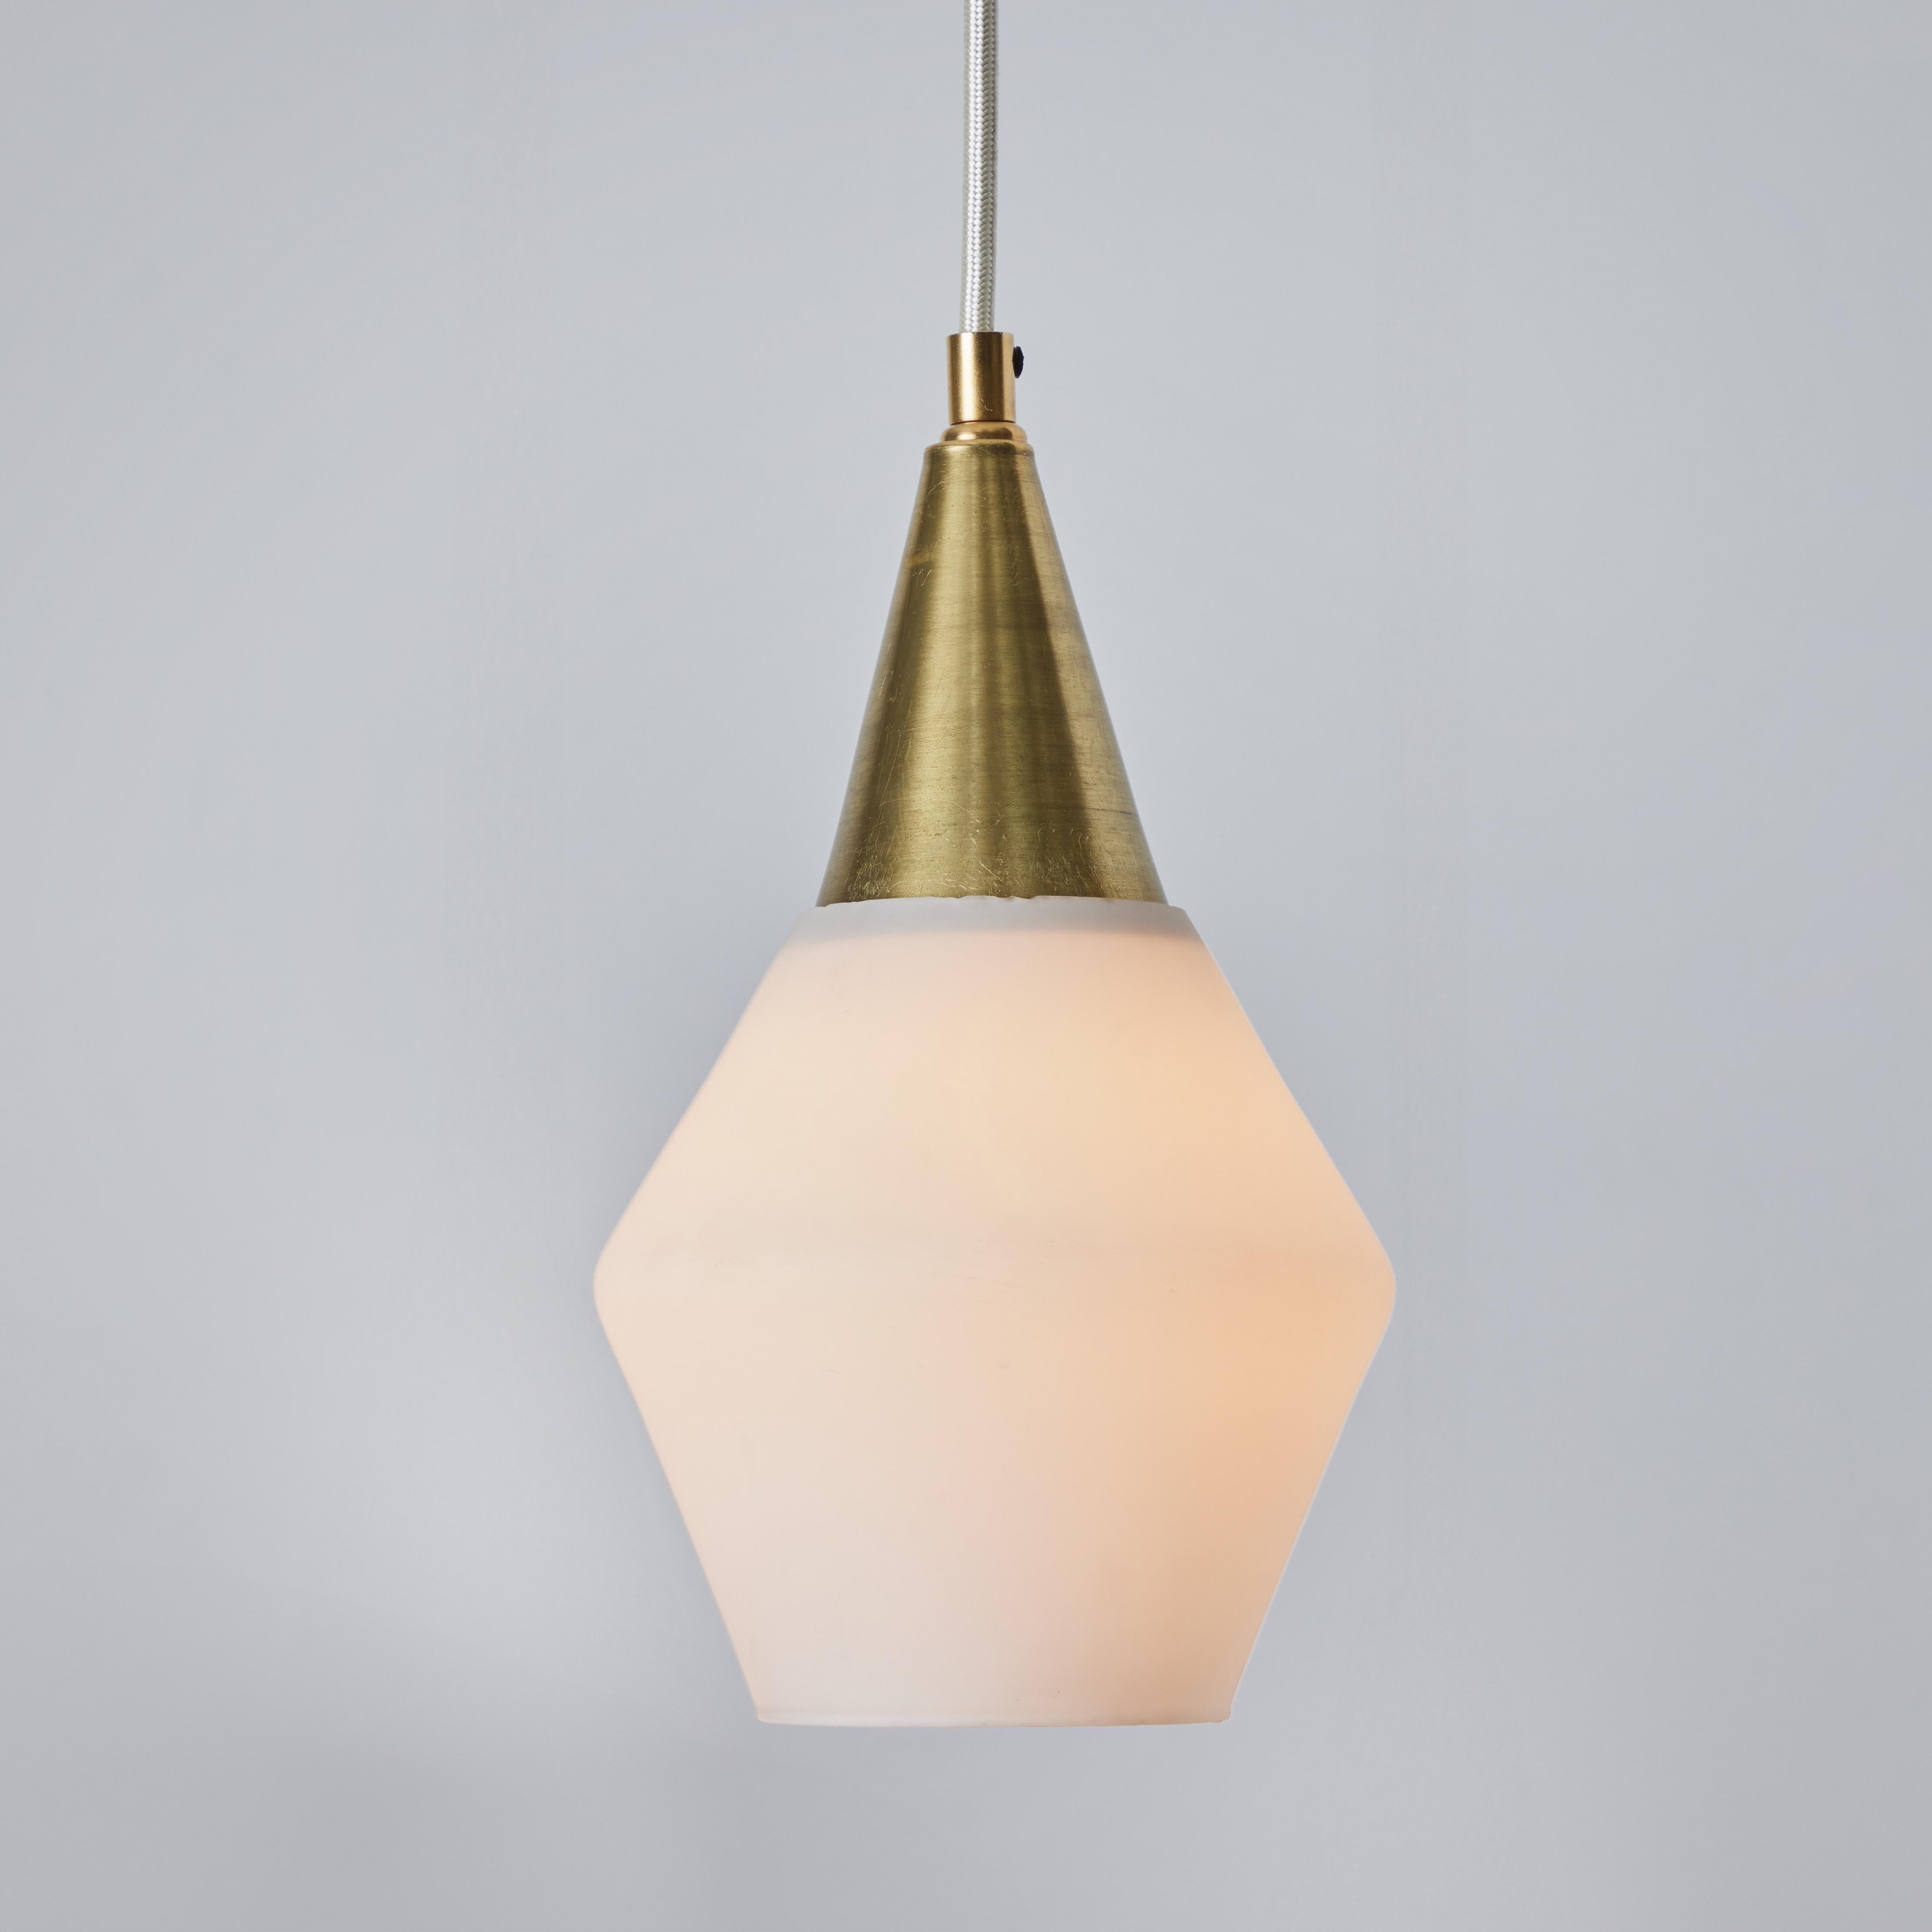 1960s Opaline Glass and Brass Pendant Attributed to Mauri Almari for Idman For Sale 2